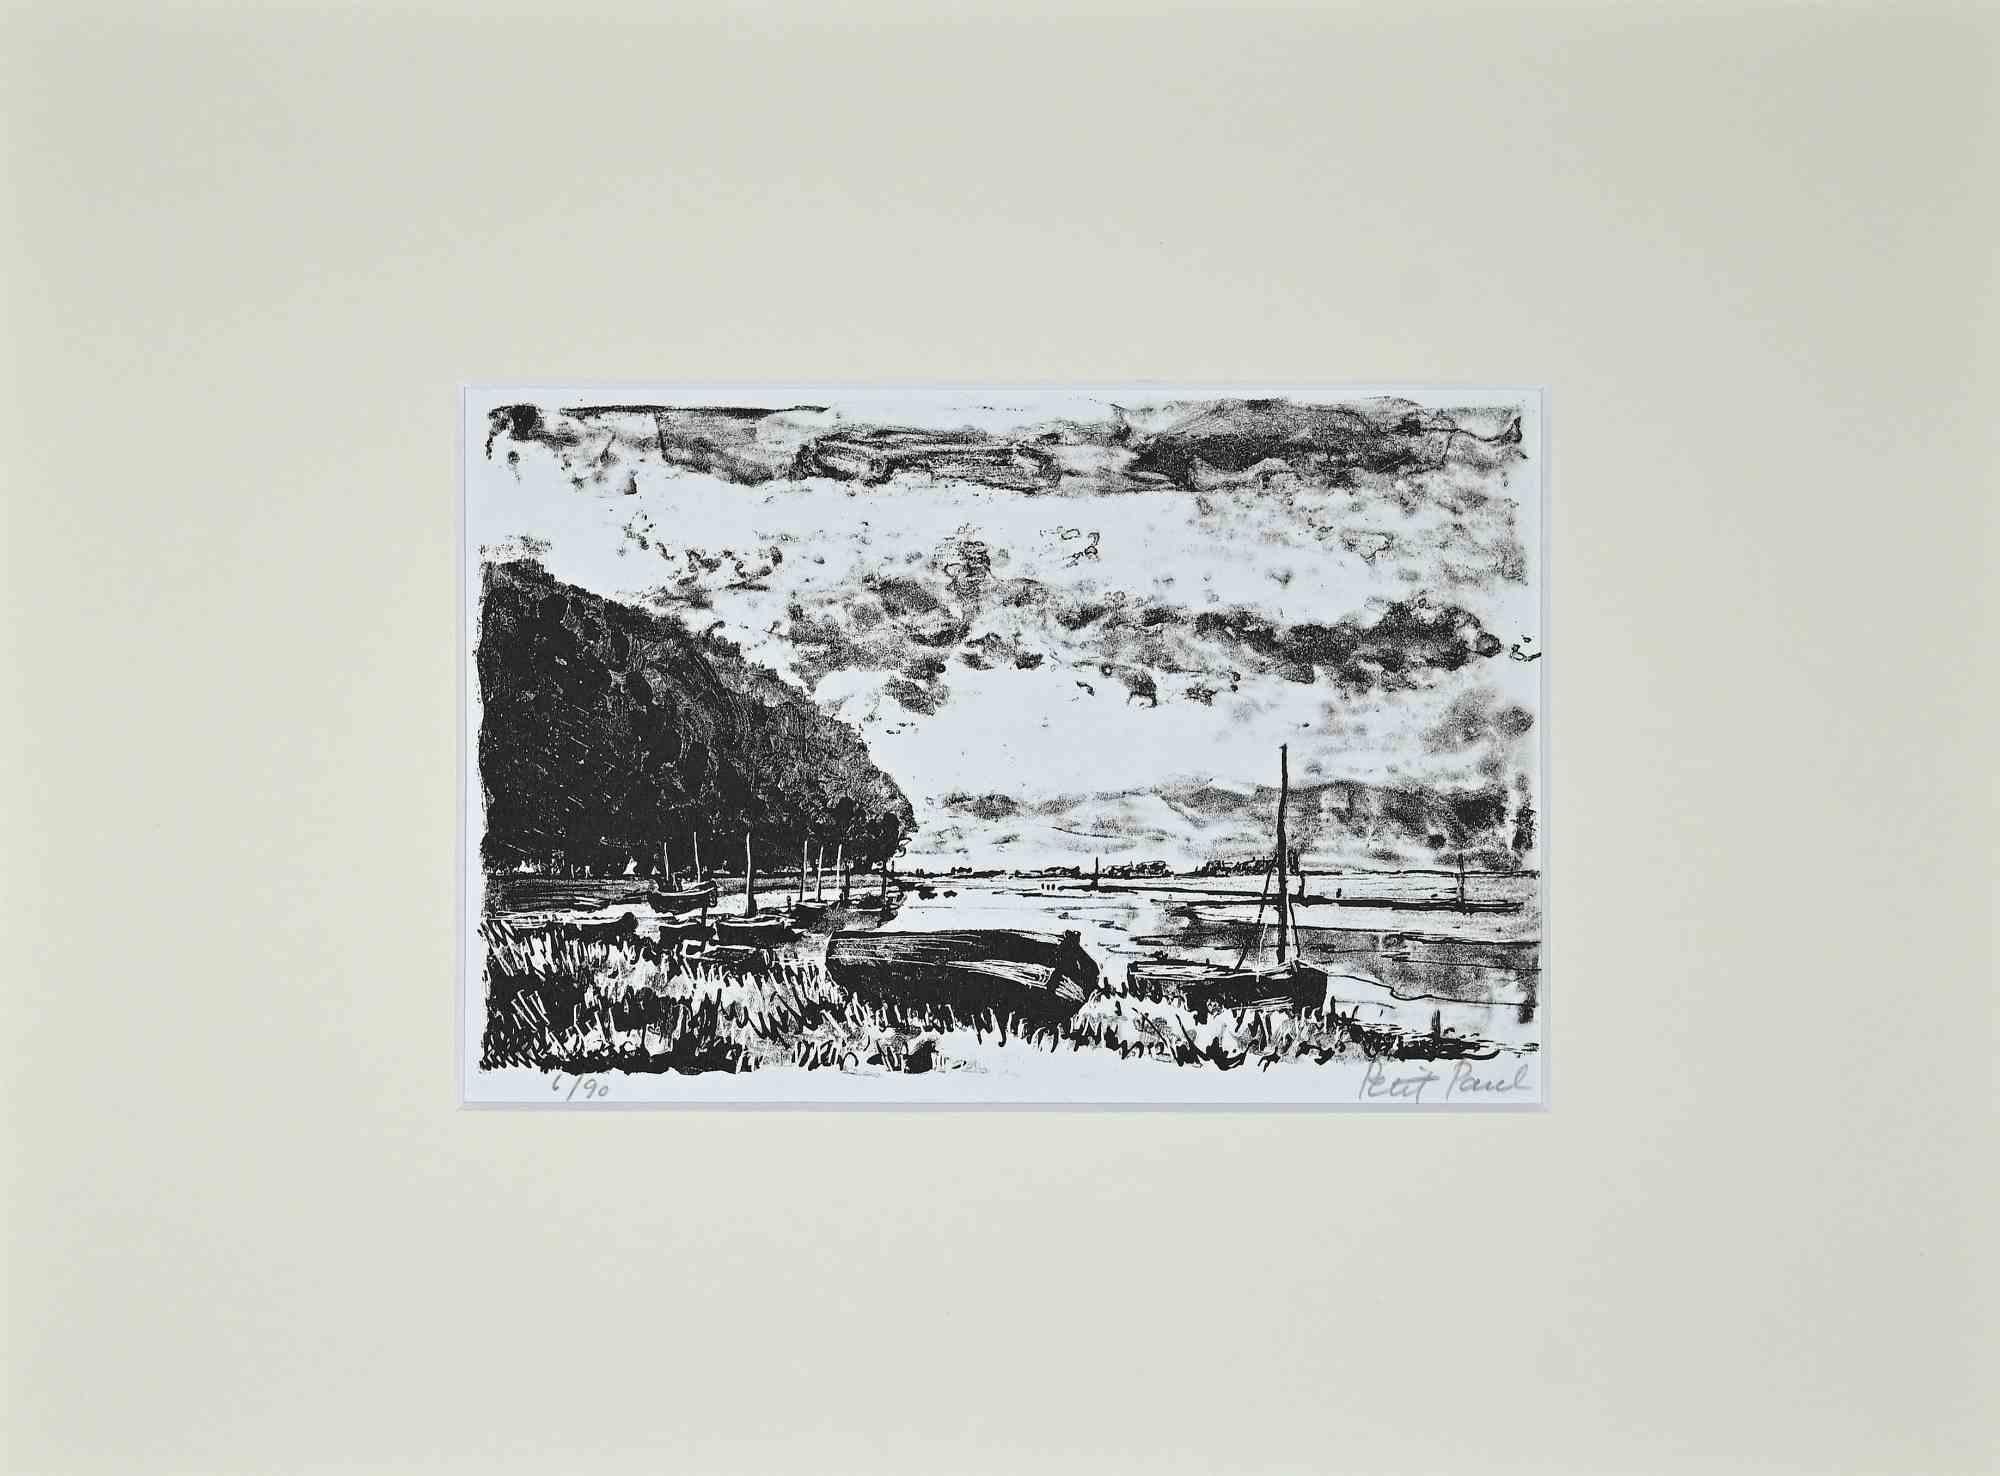 The Bay is an original lithograph realized by Paul Petit in the mid-20th.

Hand-signed.

Numbered. Edition, 6/9.

The artwork is depicted through confident strokes in a well-balanced composition.